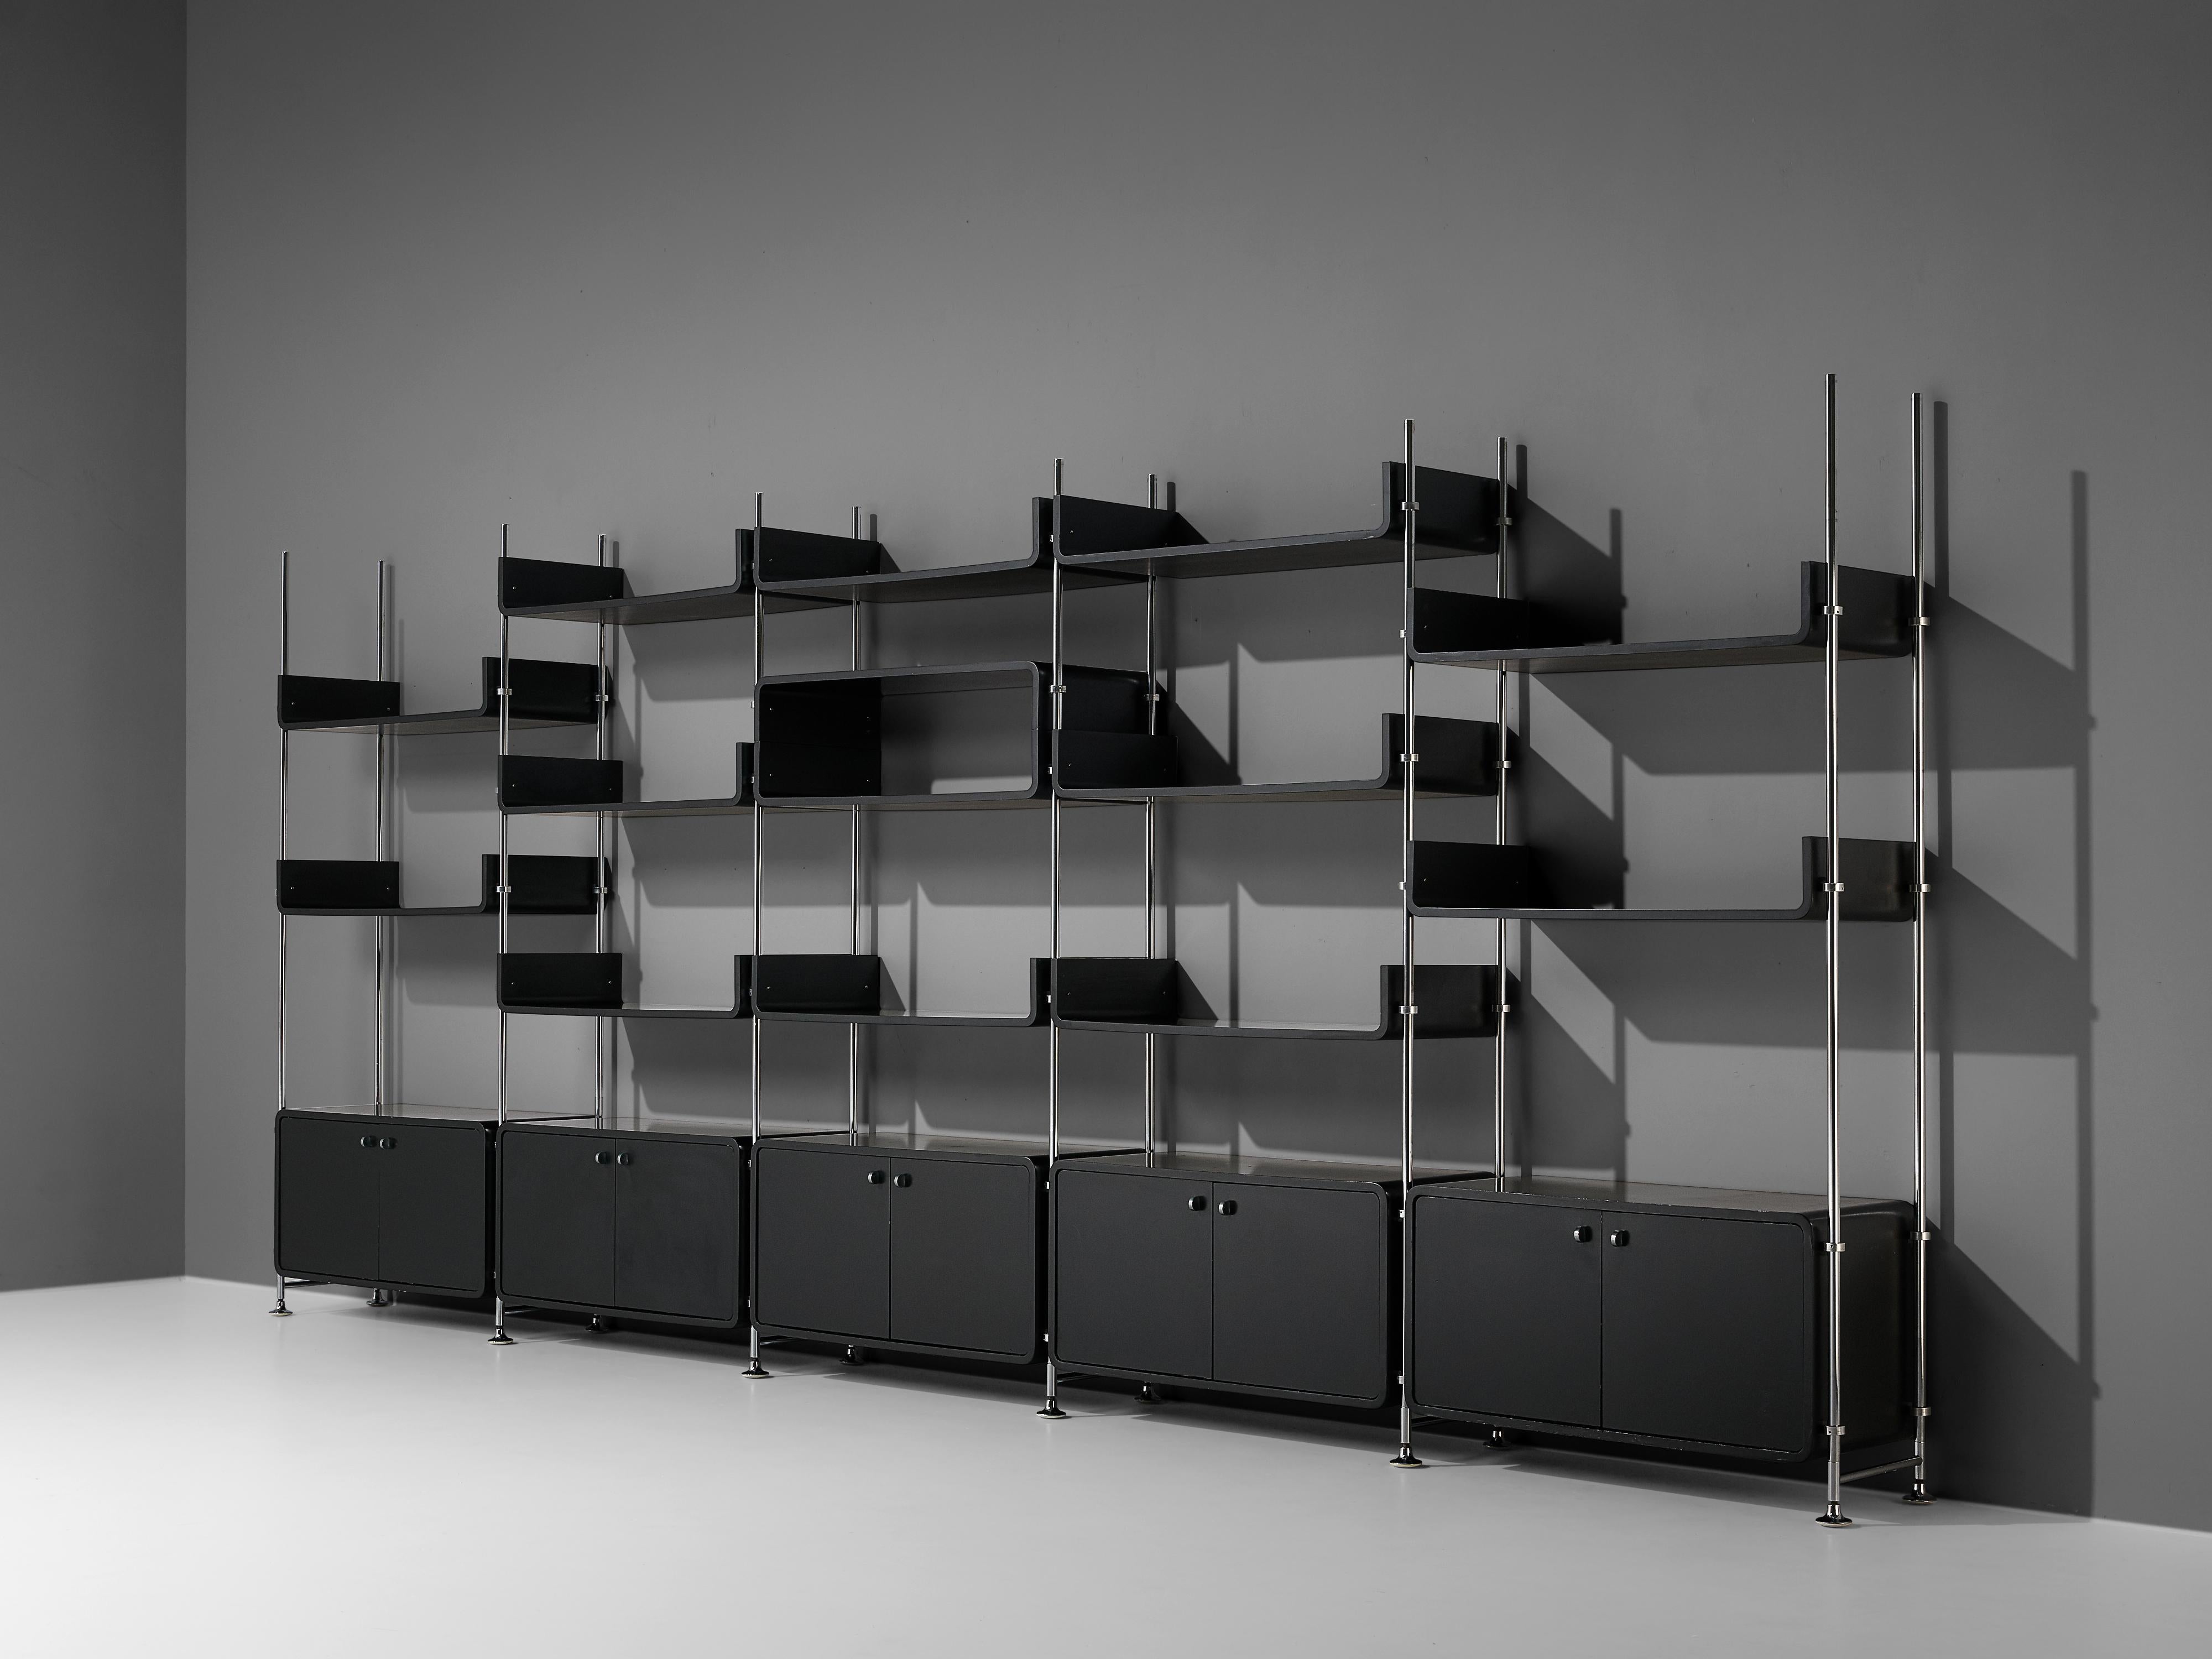 Michael Ducaroy, free-standing wall unit, steel, lacquered wood, France, 1970s

Michael Ducaroy designed this free-standing wall unit in the 1970s. In five columns are five closed cabinets and multiple shelves to find. The black lacquered wood is